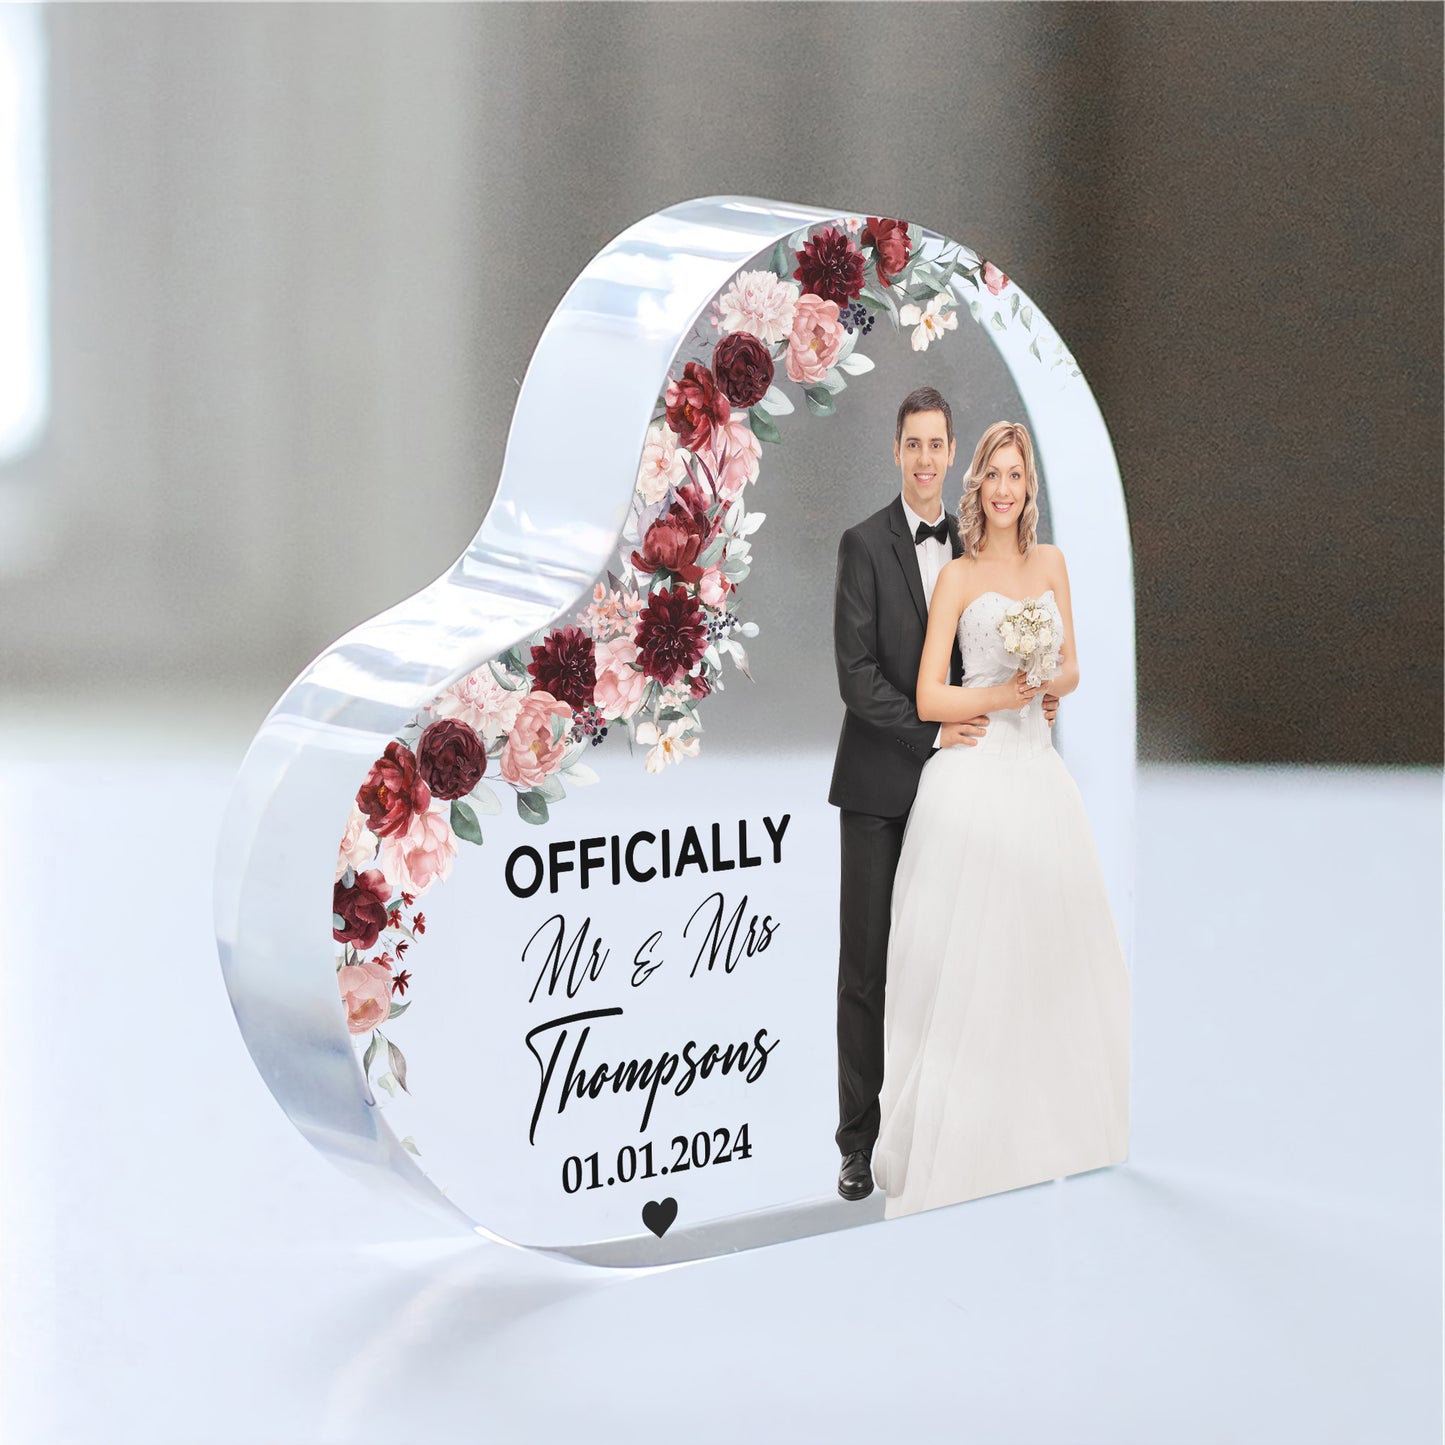 Couple - Officially Mr & Mrs - Personalized Acrylic Photo Plaque